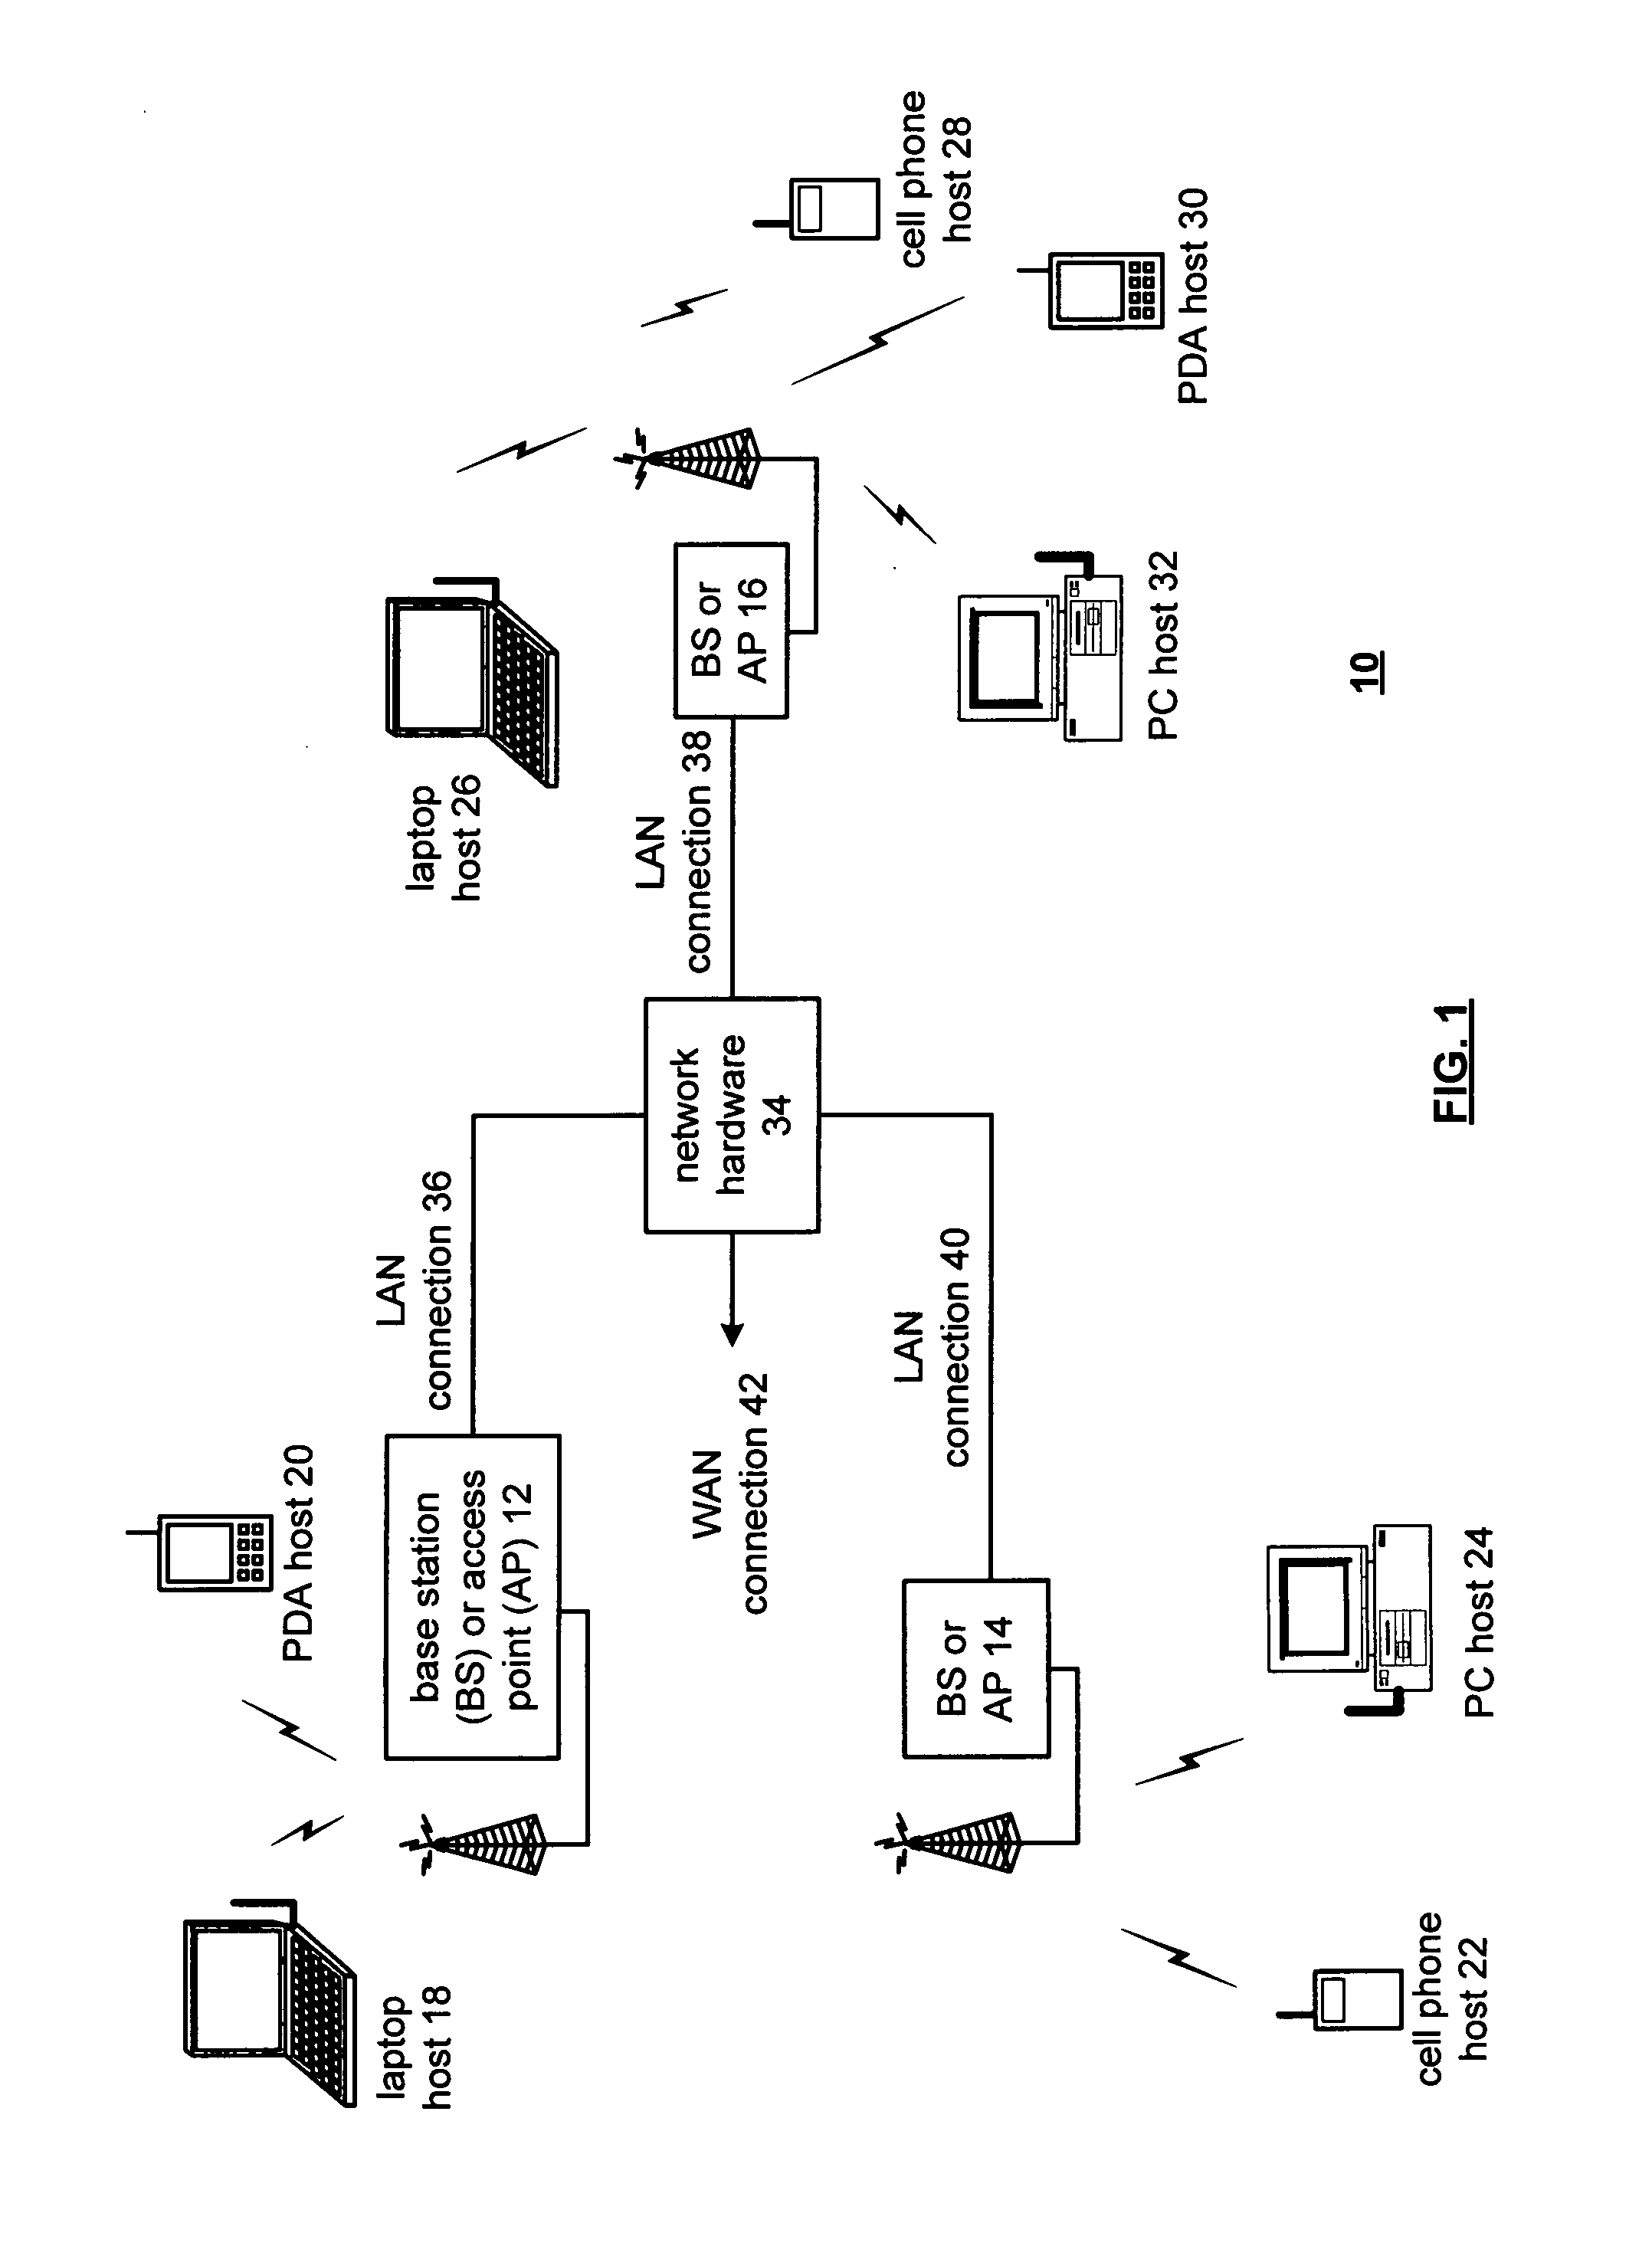 High speed data bus for communicating between wireless interface devices of a host device